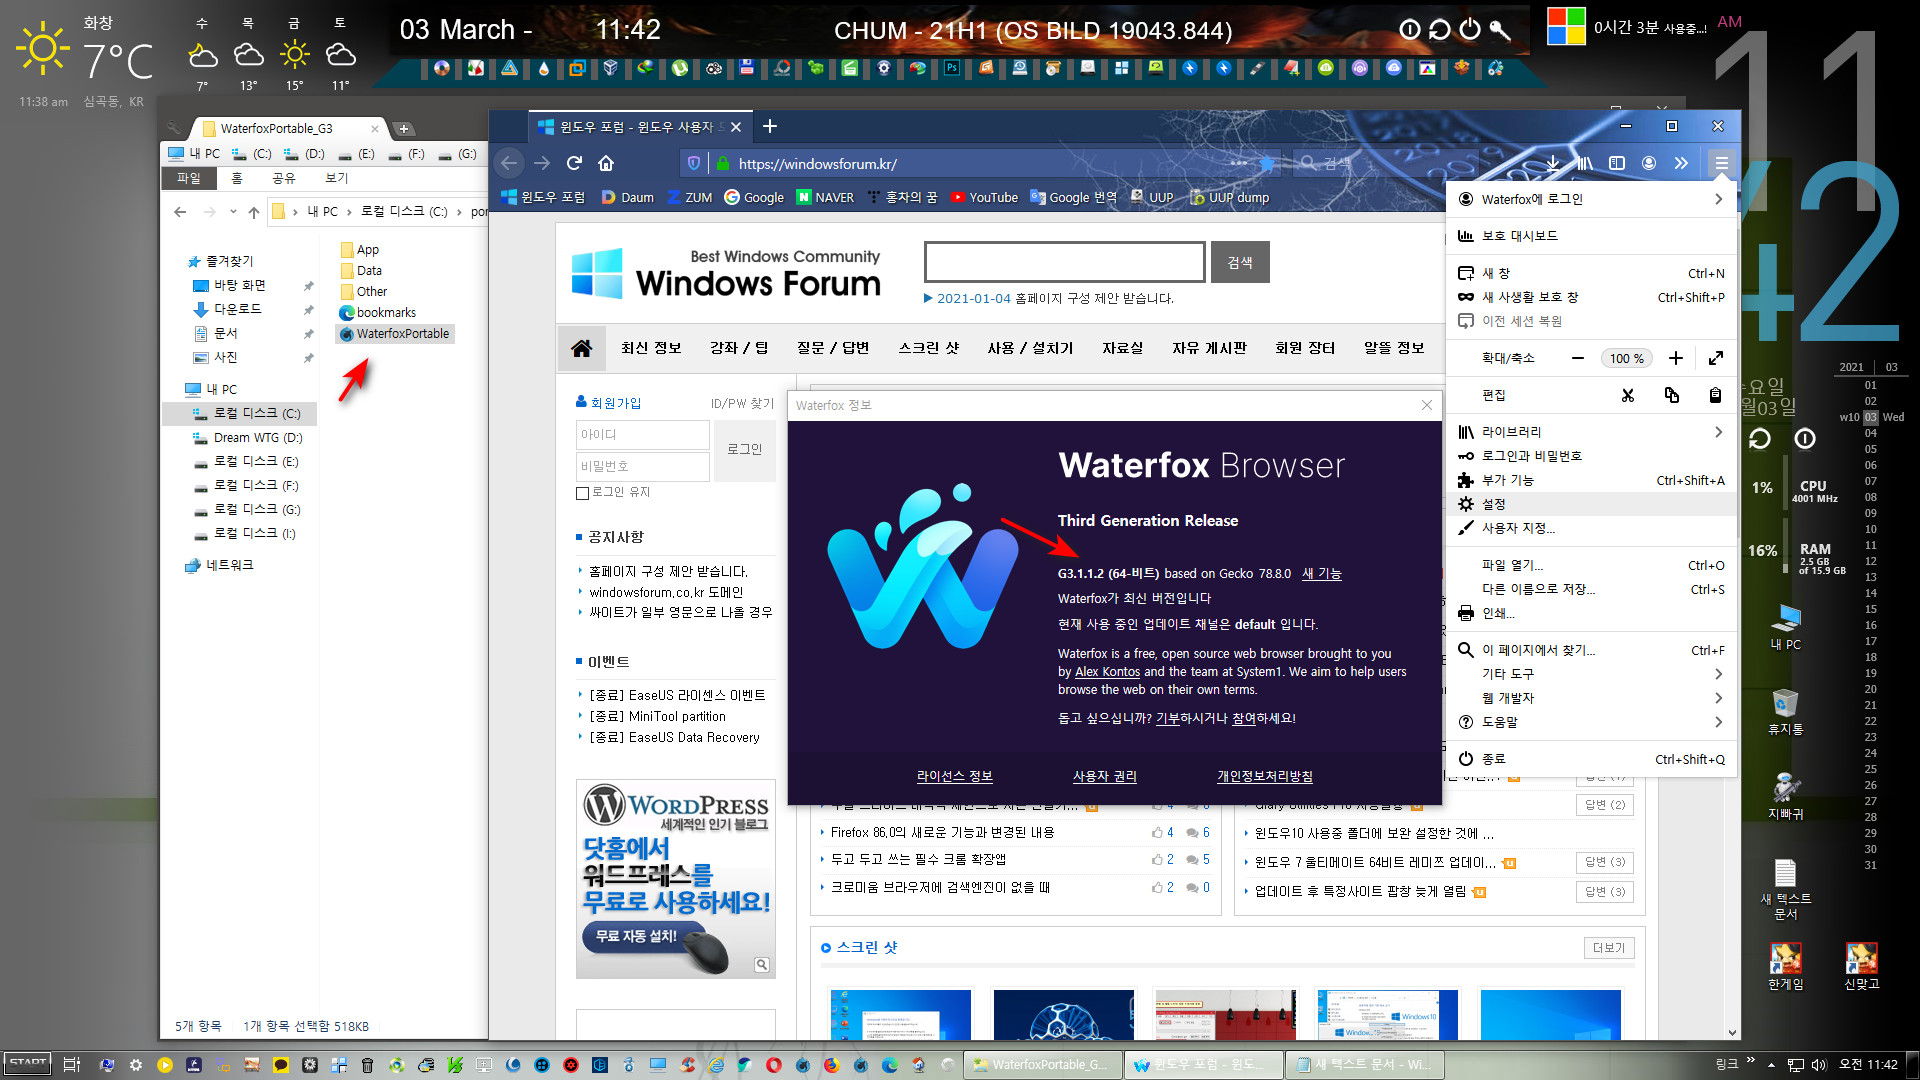 Waterfox Current G5.1.10 download the new